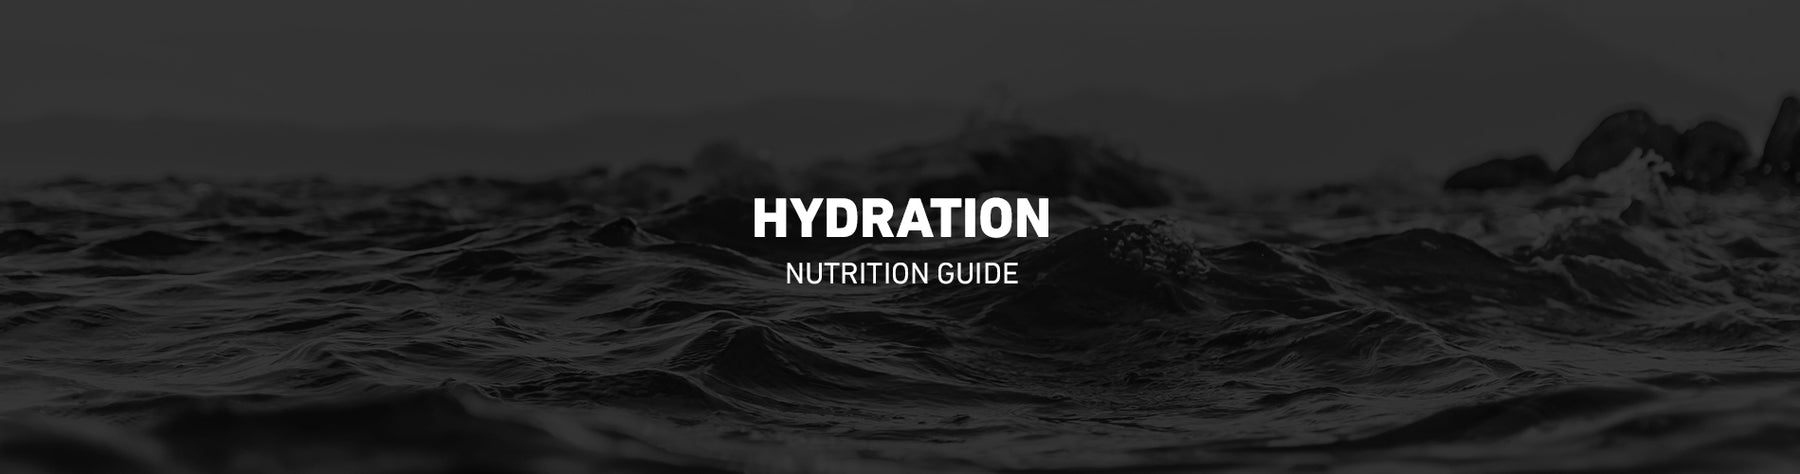 Nutrition Guide - Hydration